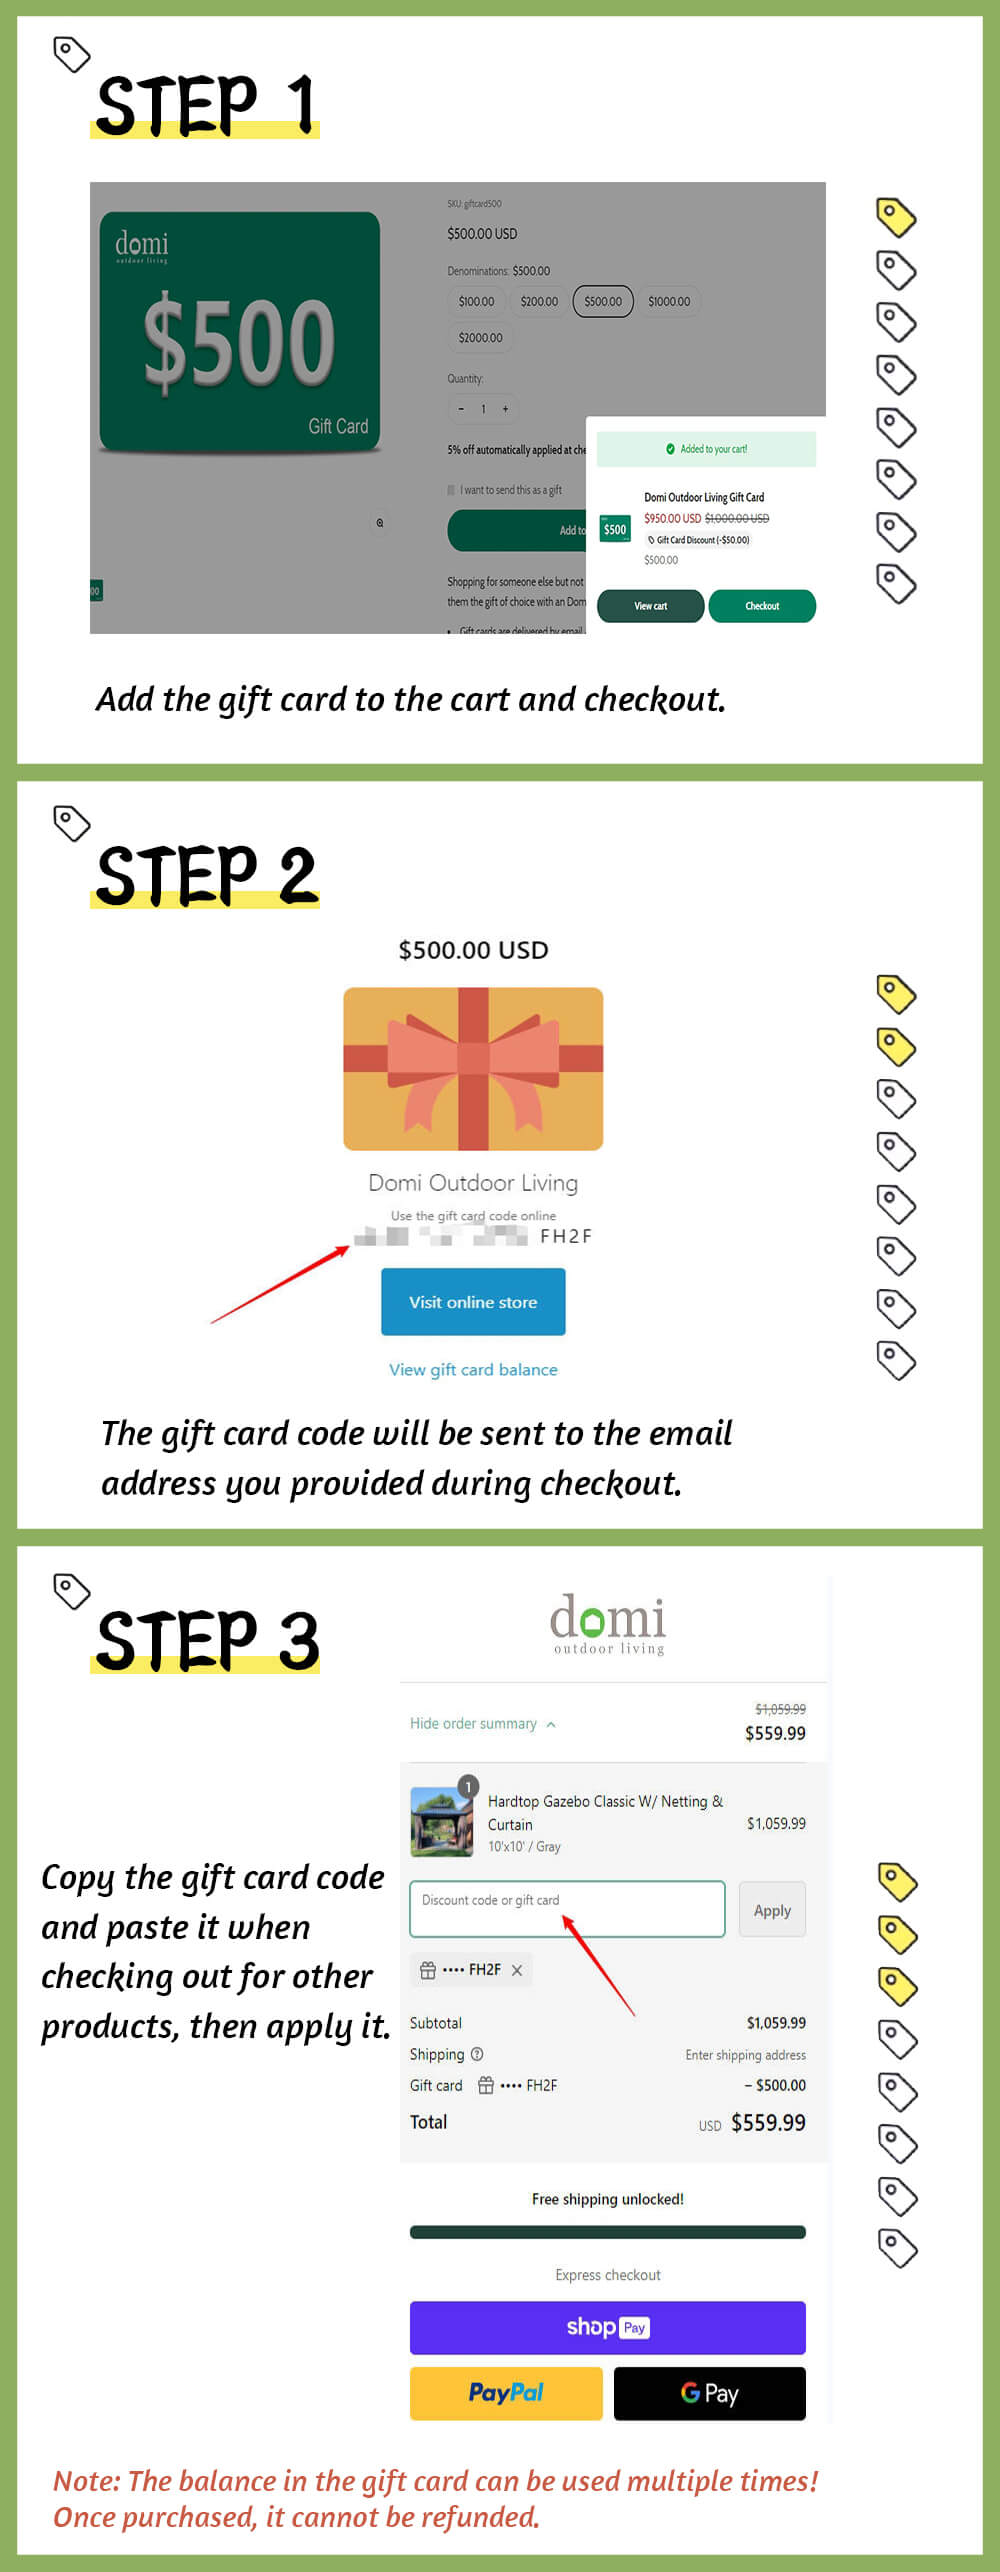 Domi Outdoor Living Gift Card